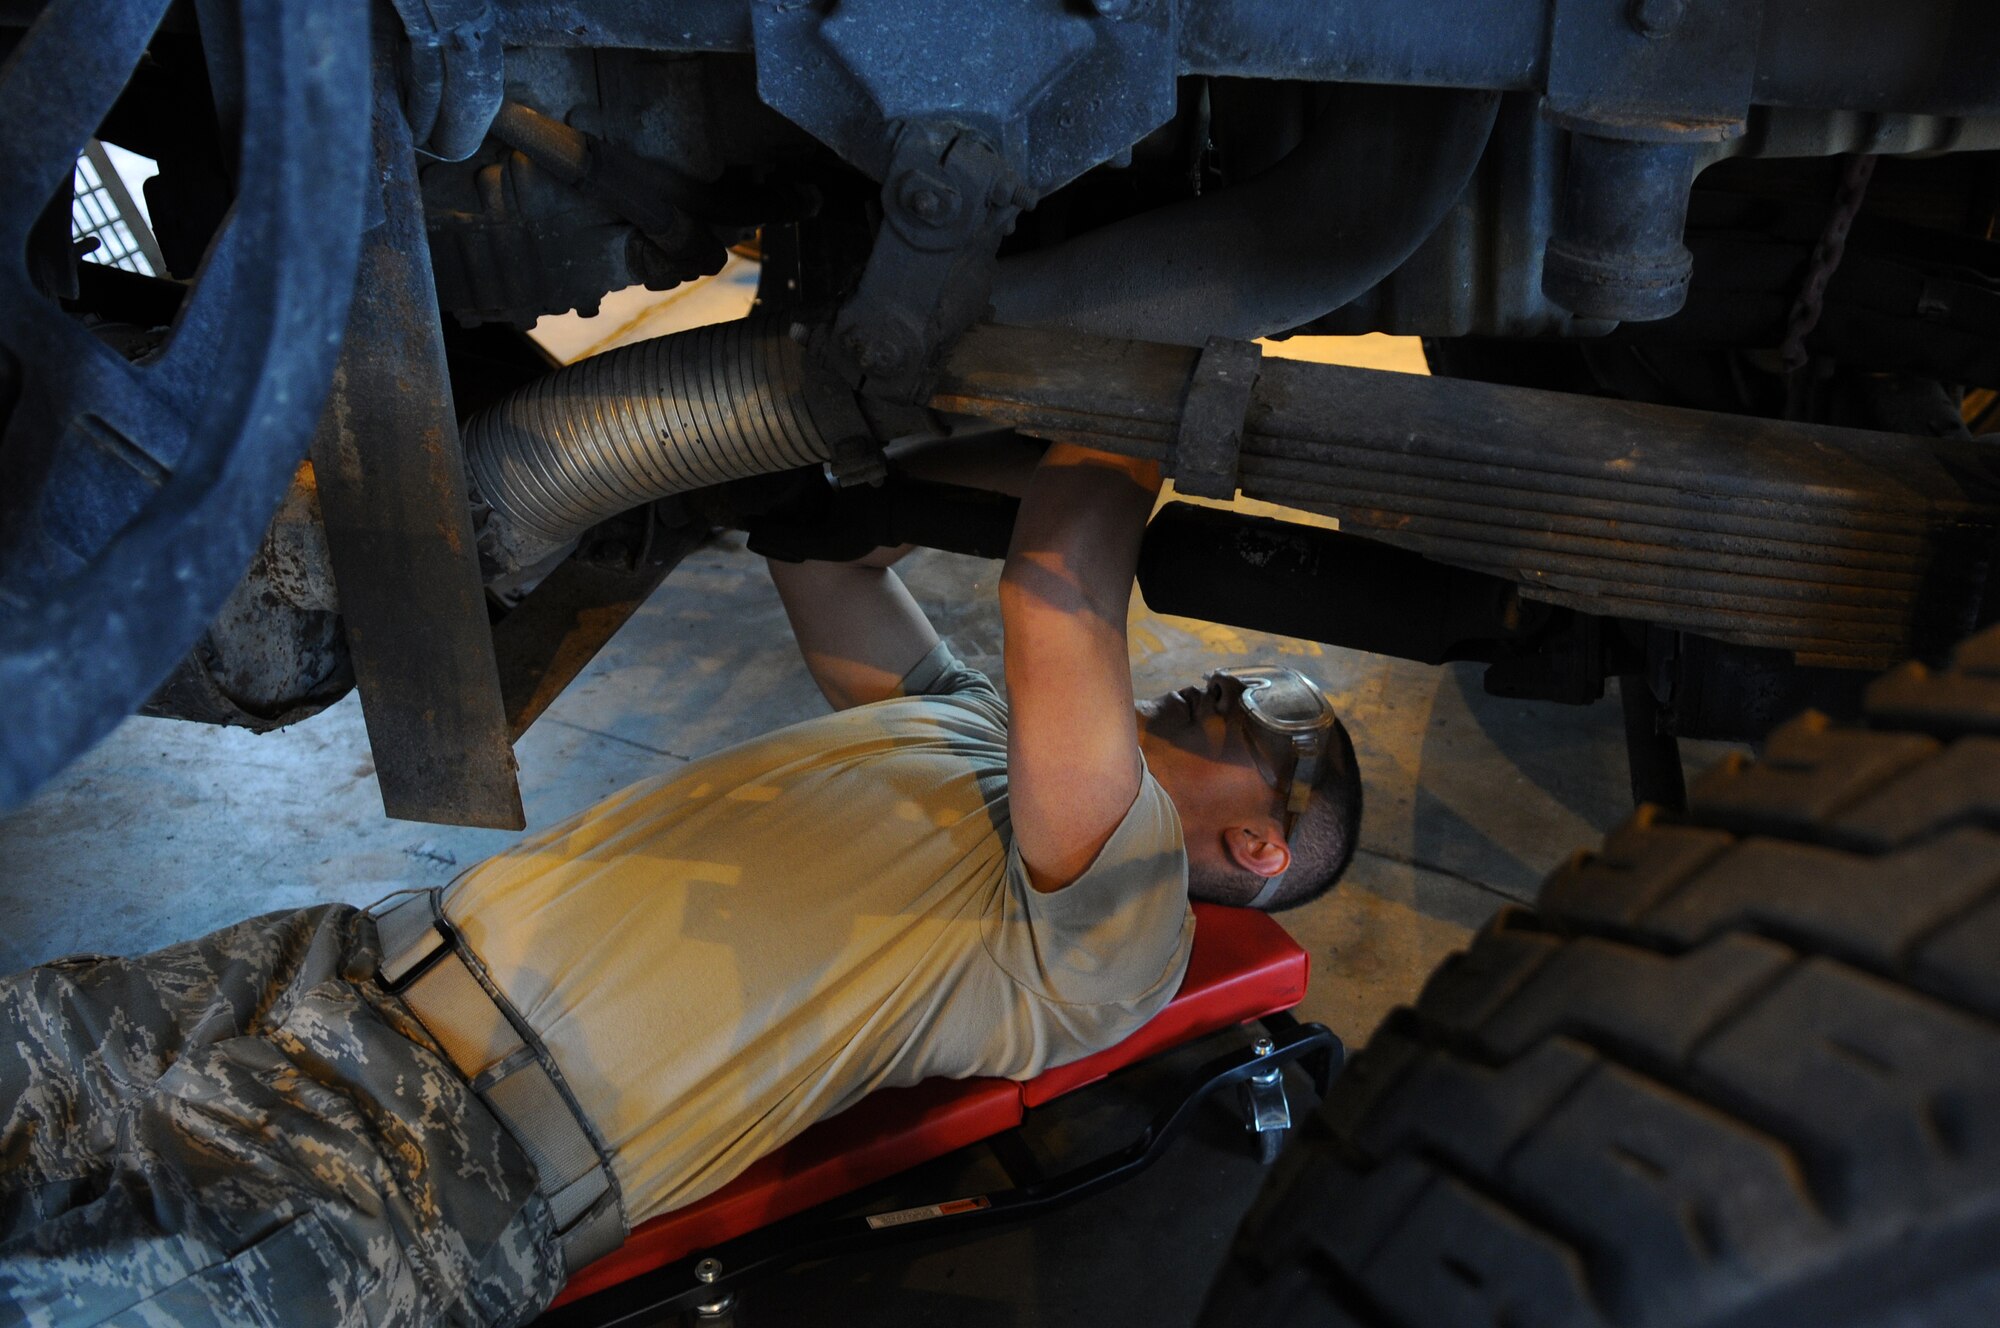 U.S Air Force Airman Carlos Limon, 86th Vehicle Readiness Squadron vehicle and vehicular apprentice, works on a flightline sweeper on Aug. 14, 2009, Ramstein Air Base, Germany. The 86th VRS squadron has the biggest fleet in the Air Force with about 2,100 vehicles to maintain. (U.S. Air Force photo by Airman 1st Class Grovert Fuentes-Contreras)